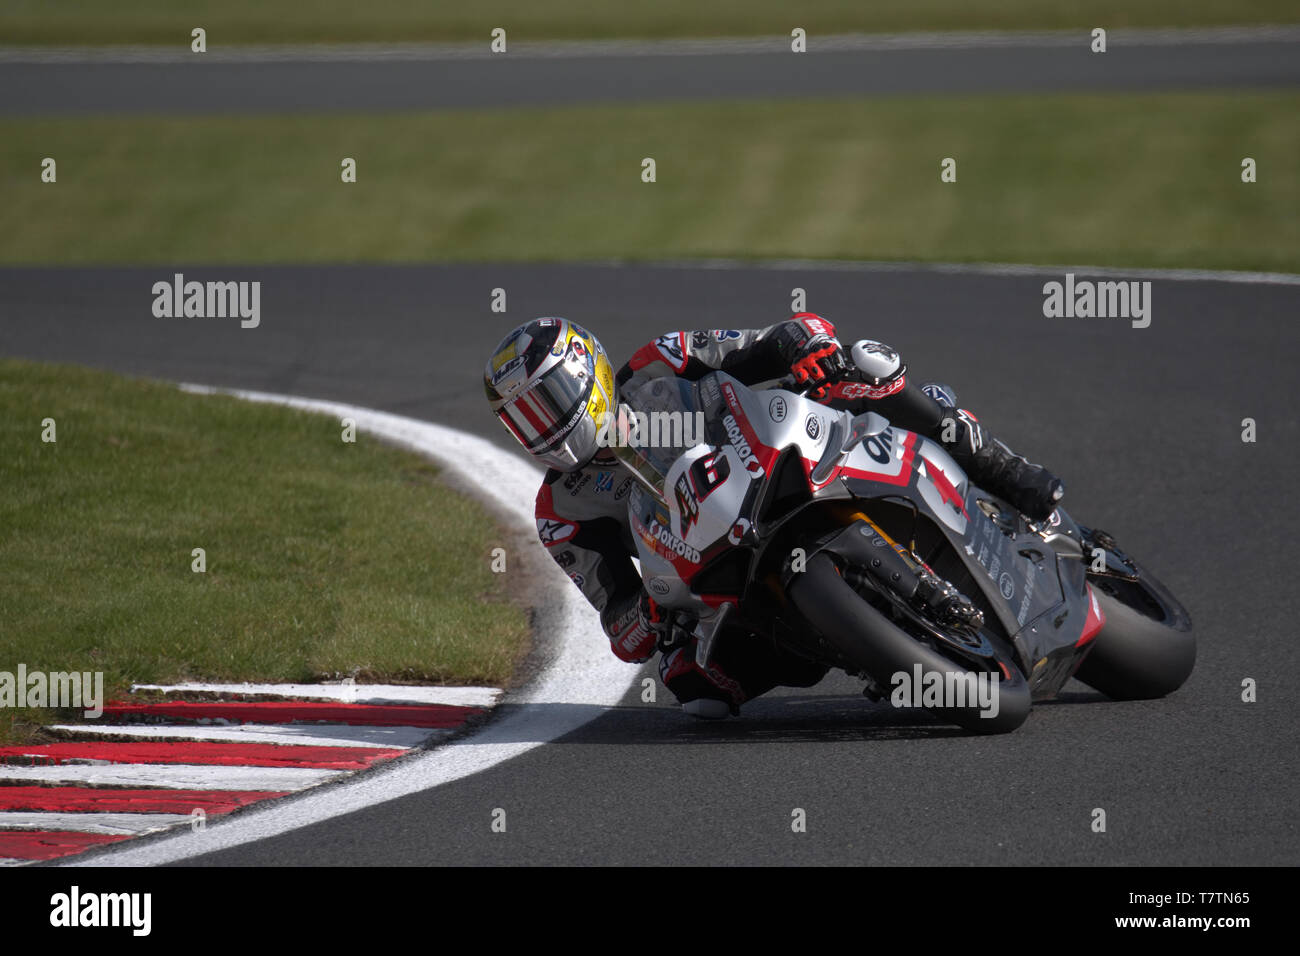 British superbike rider Tommy Bridewell racing at Oulton park Stock Photo